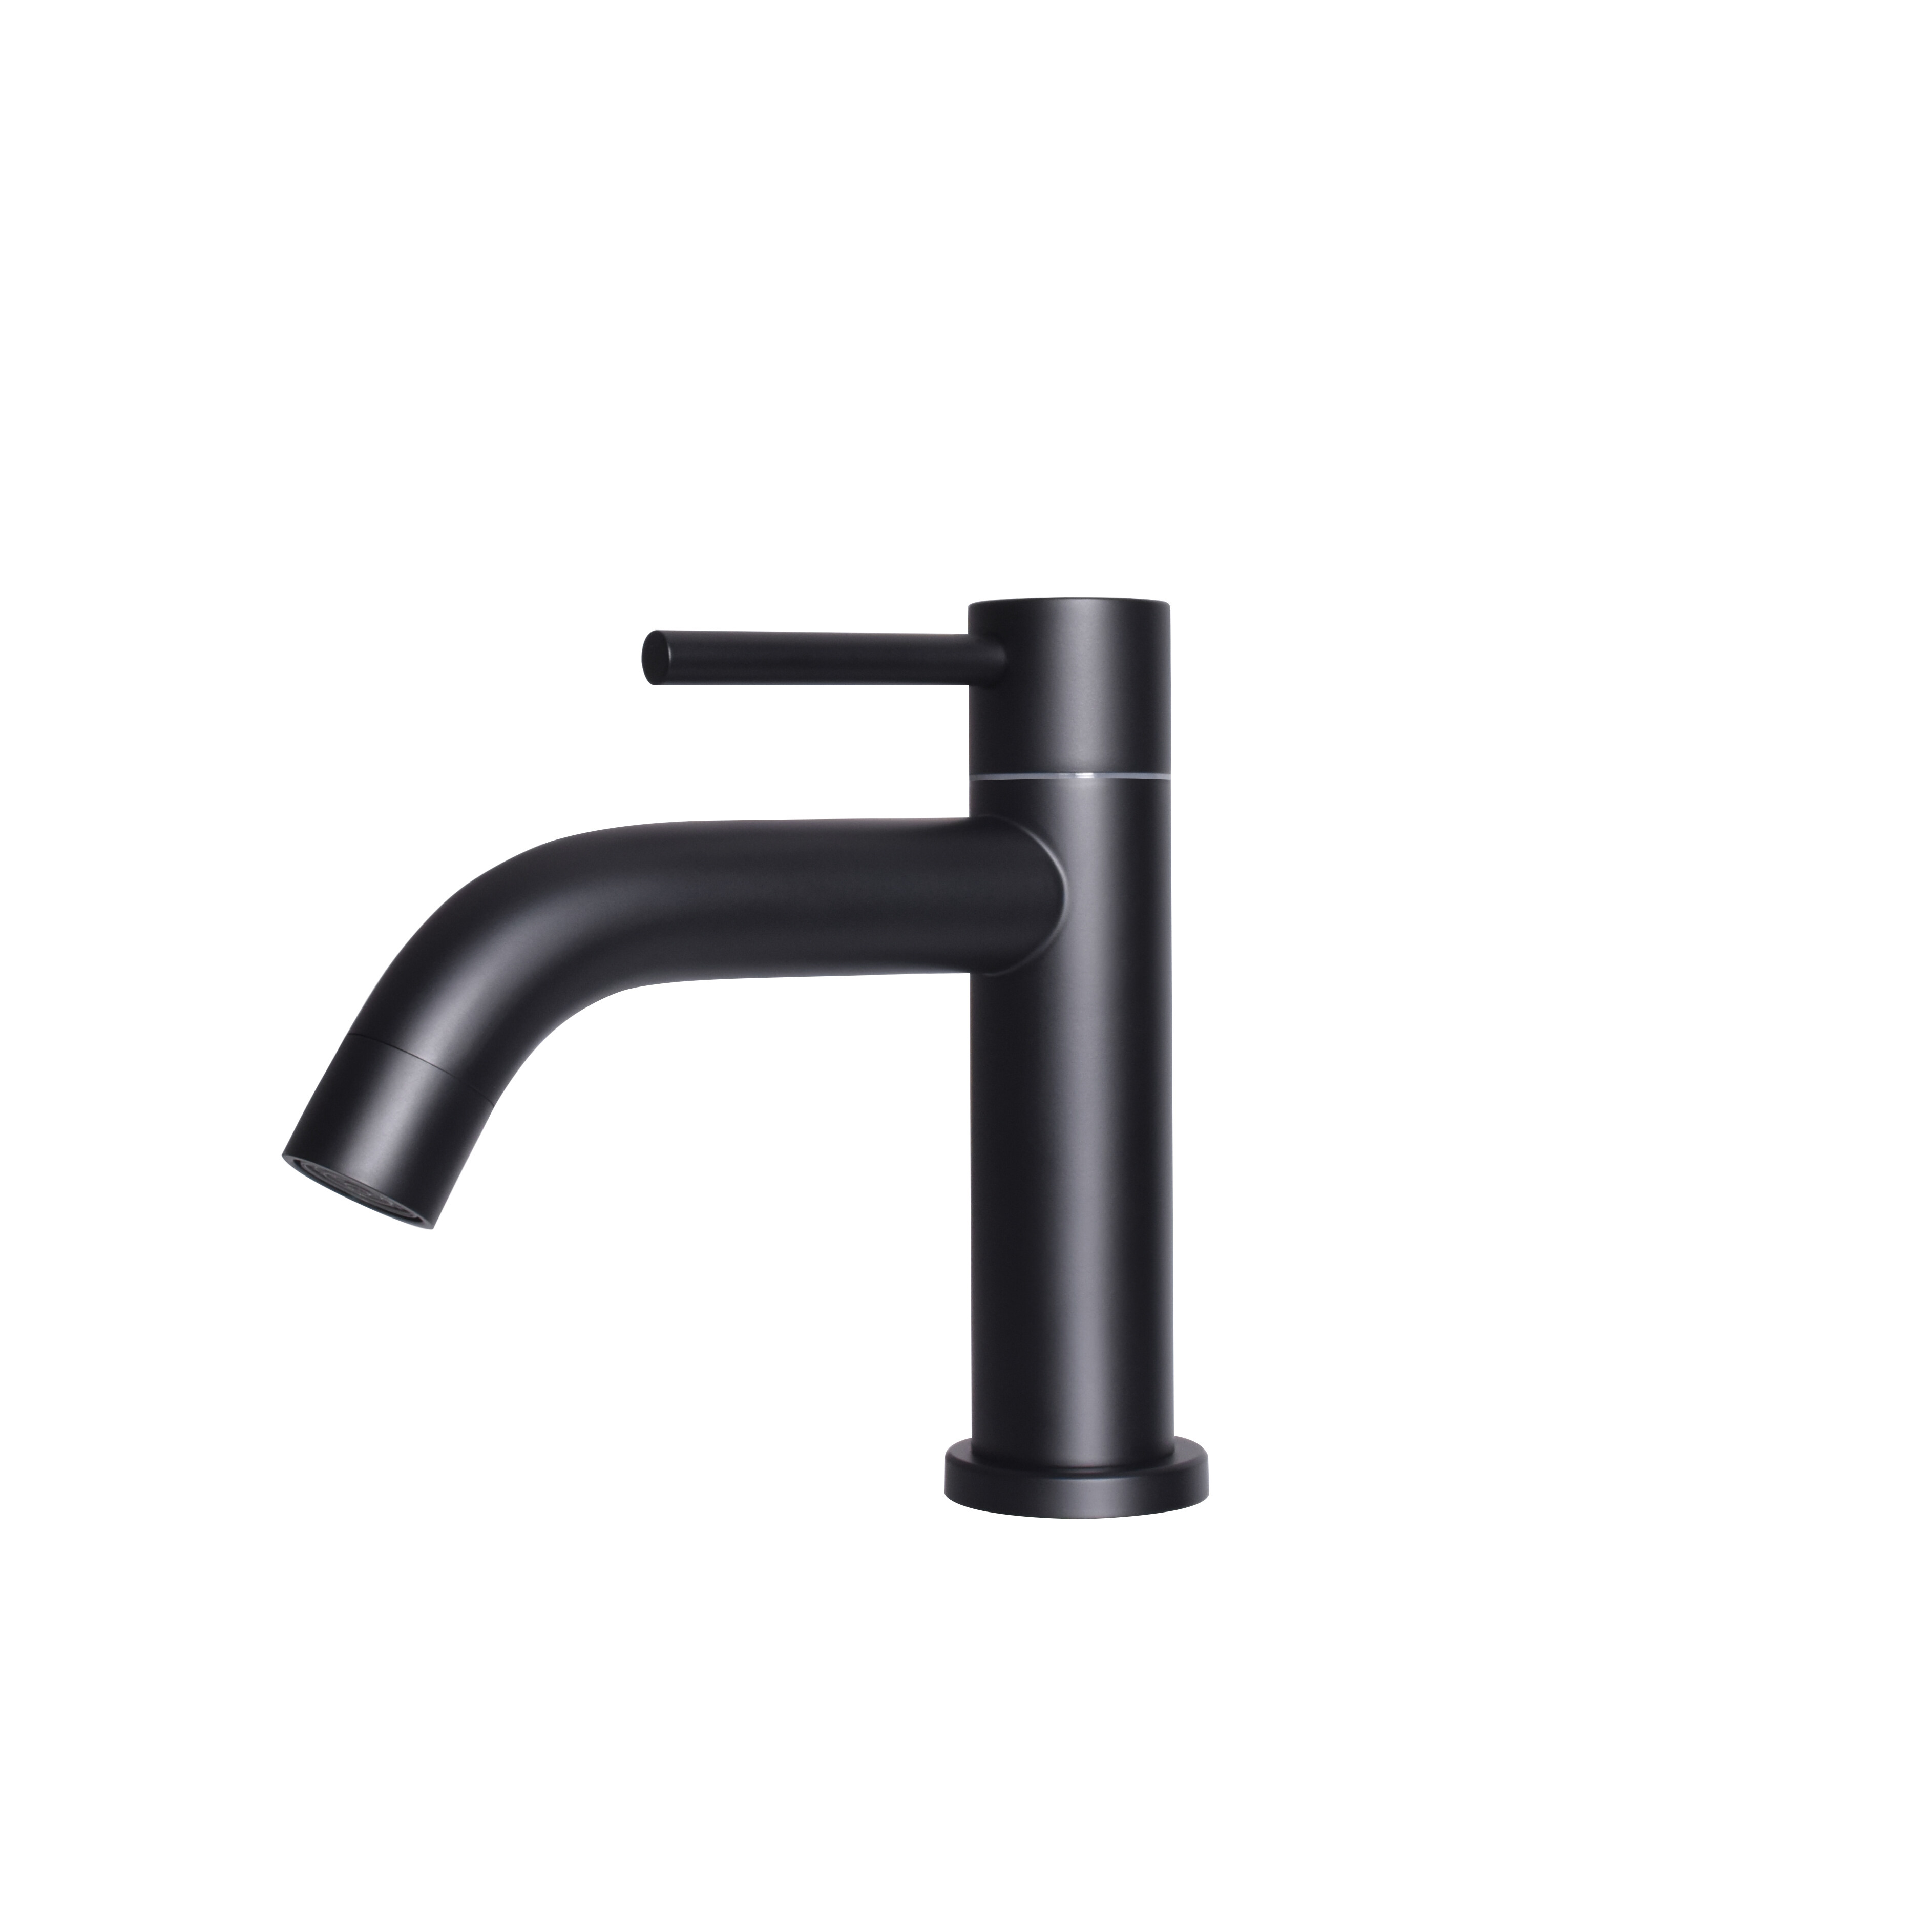 6 Key Benefits of RO Water Faucet